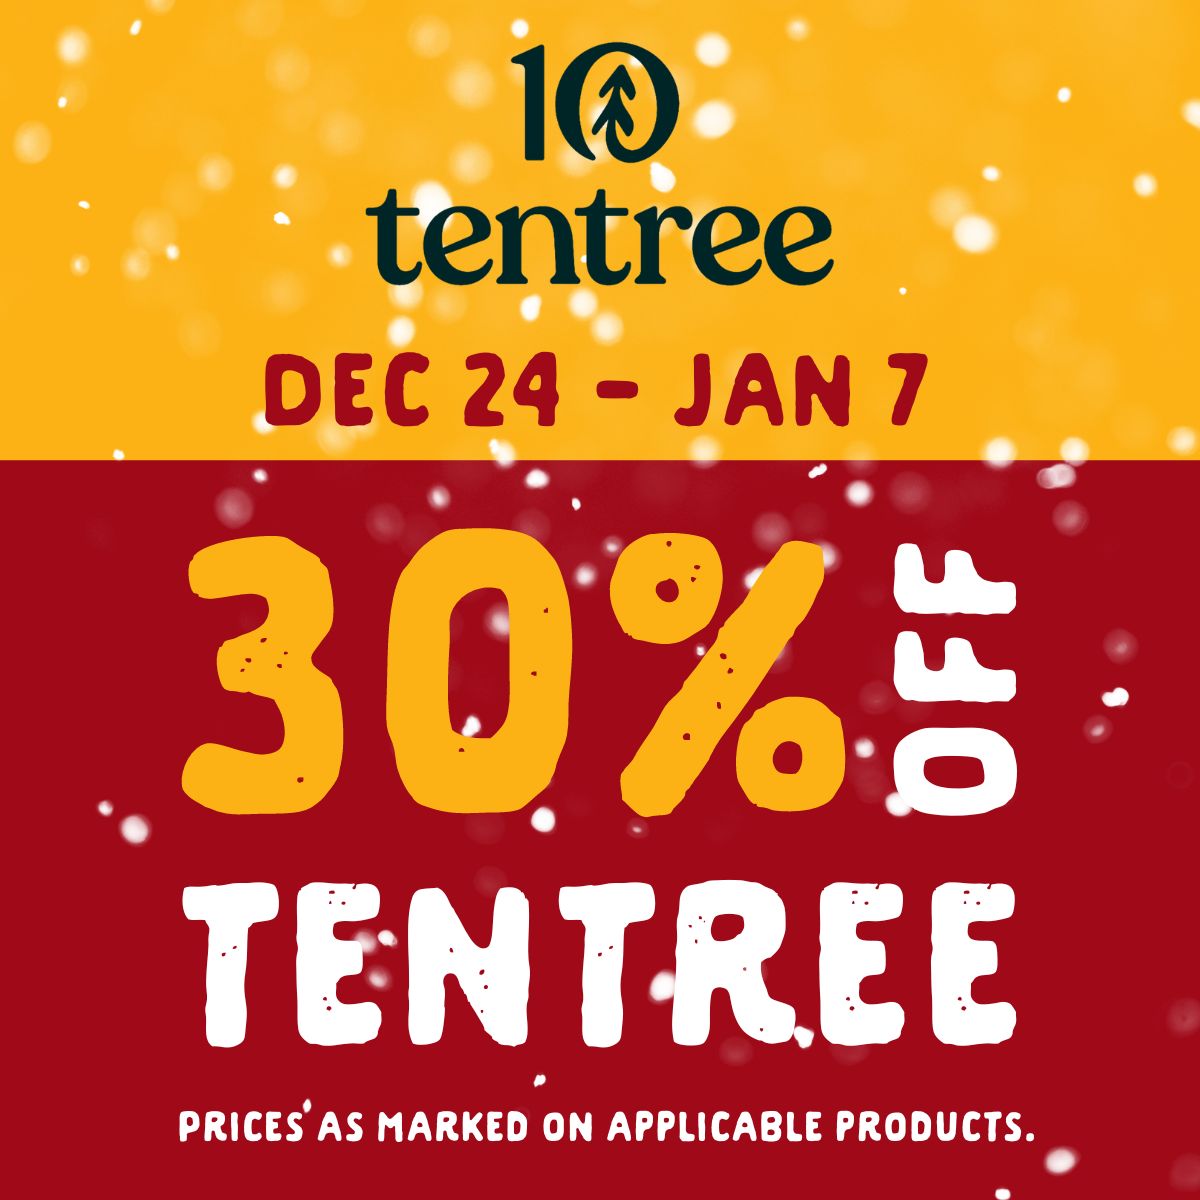 30% off Tentree from December 24 until January 7. Prices as marked on applicable products.